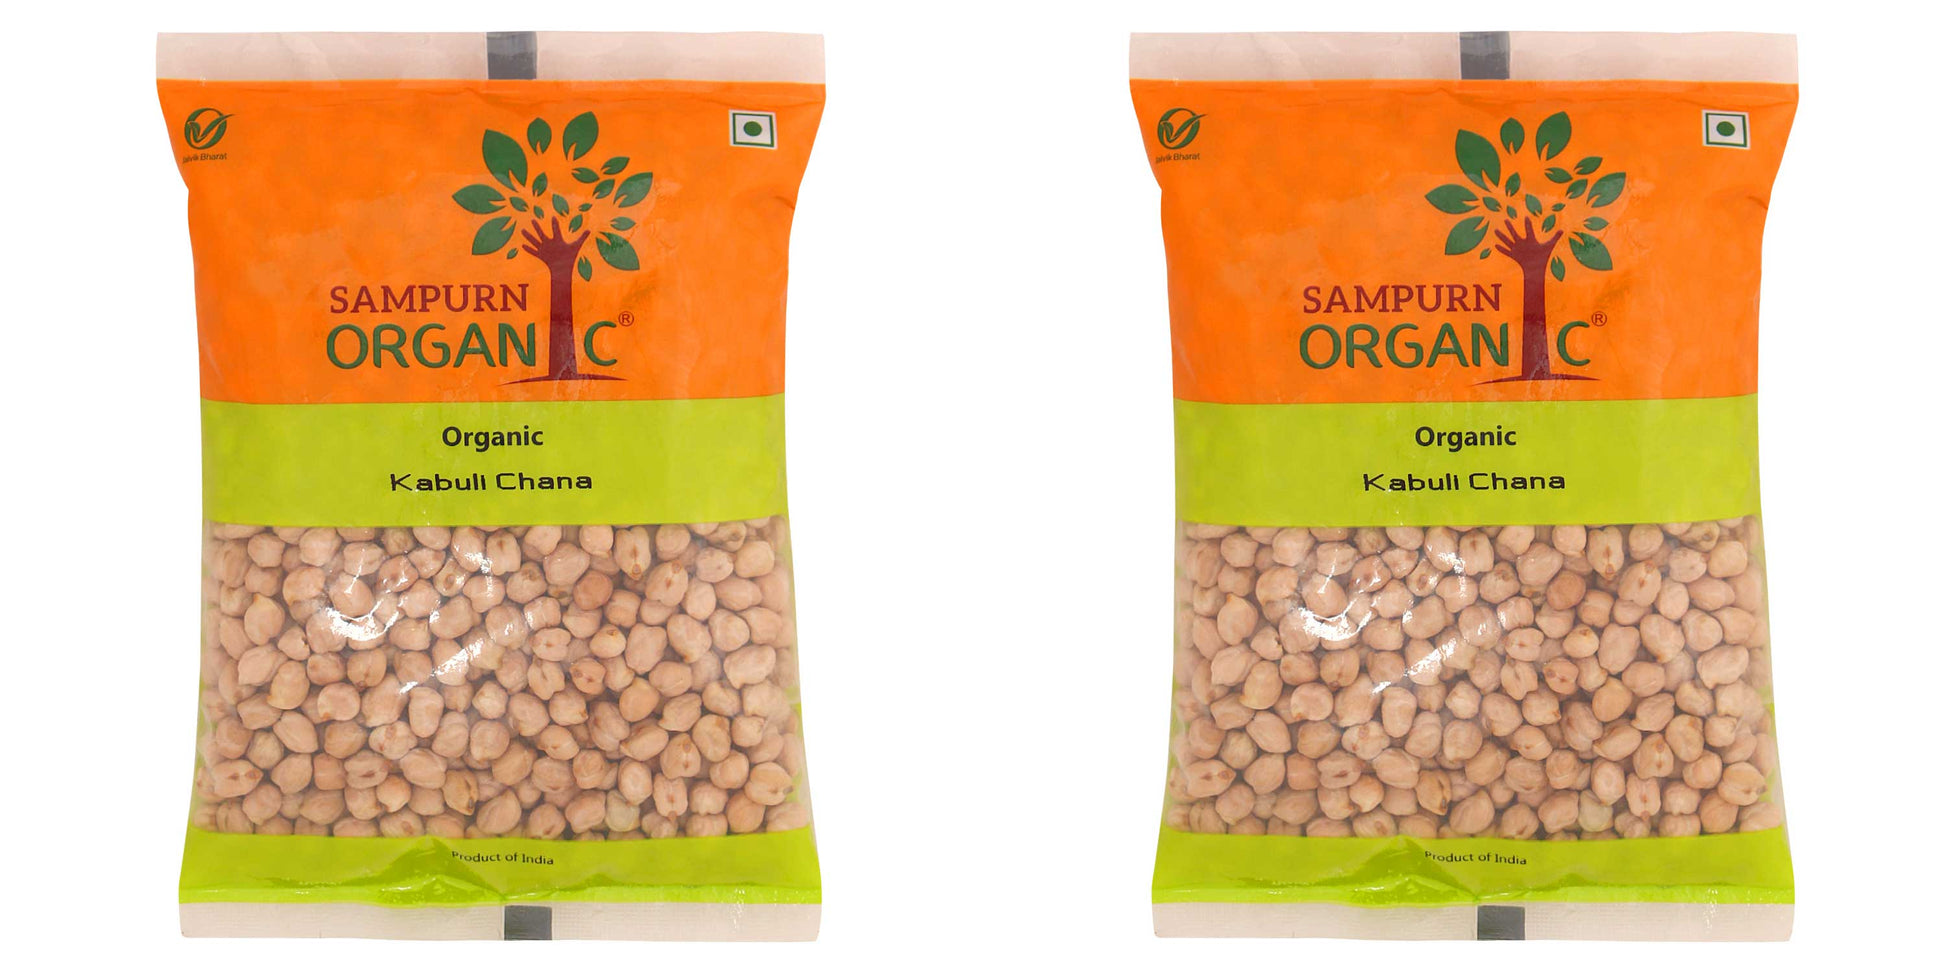 Sampurn Organic kabuli chana namkeen 500 gm 1 kg combo pack yellow roasted daal chhole channa pulses dal500g chickpeas lentils chick peas curry nutrition recipe split bengal gram whole flour pulses